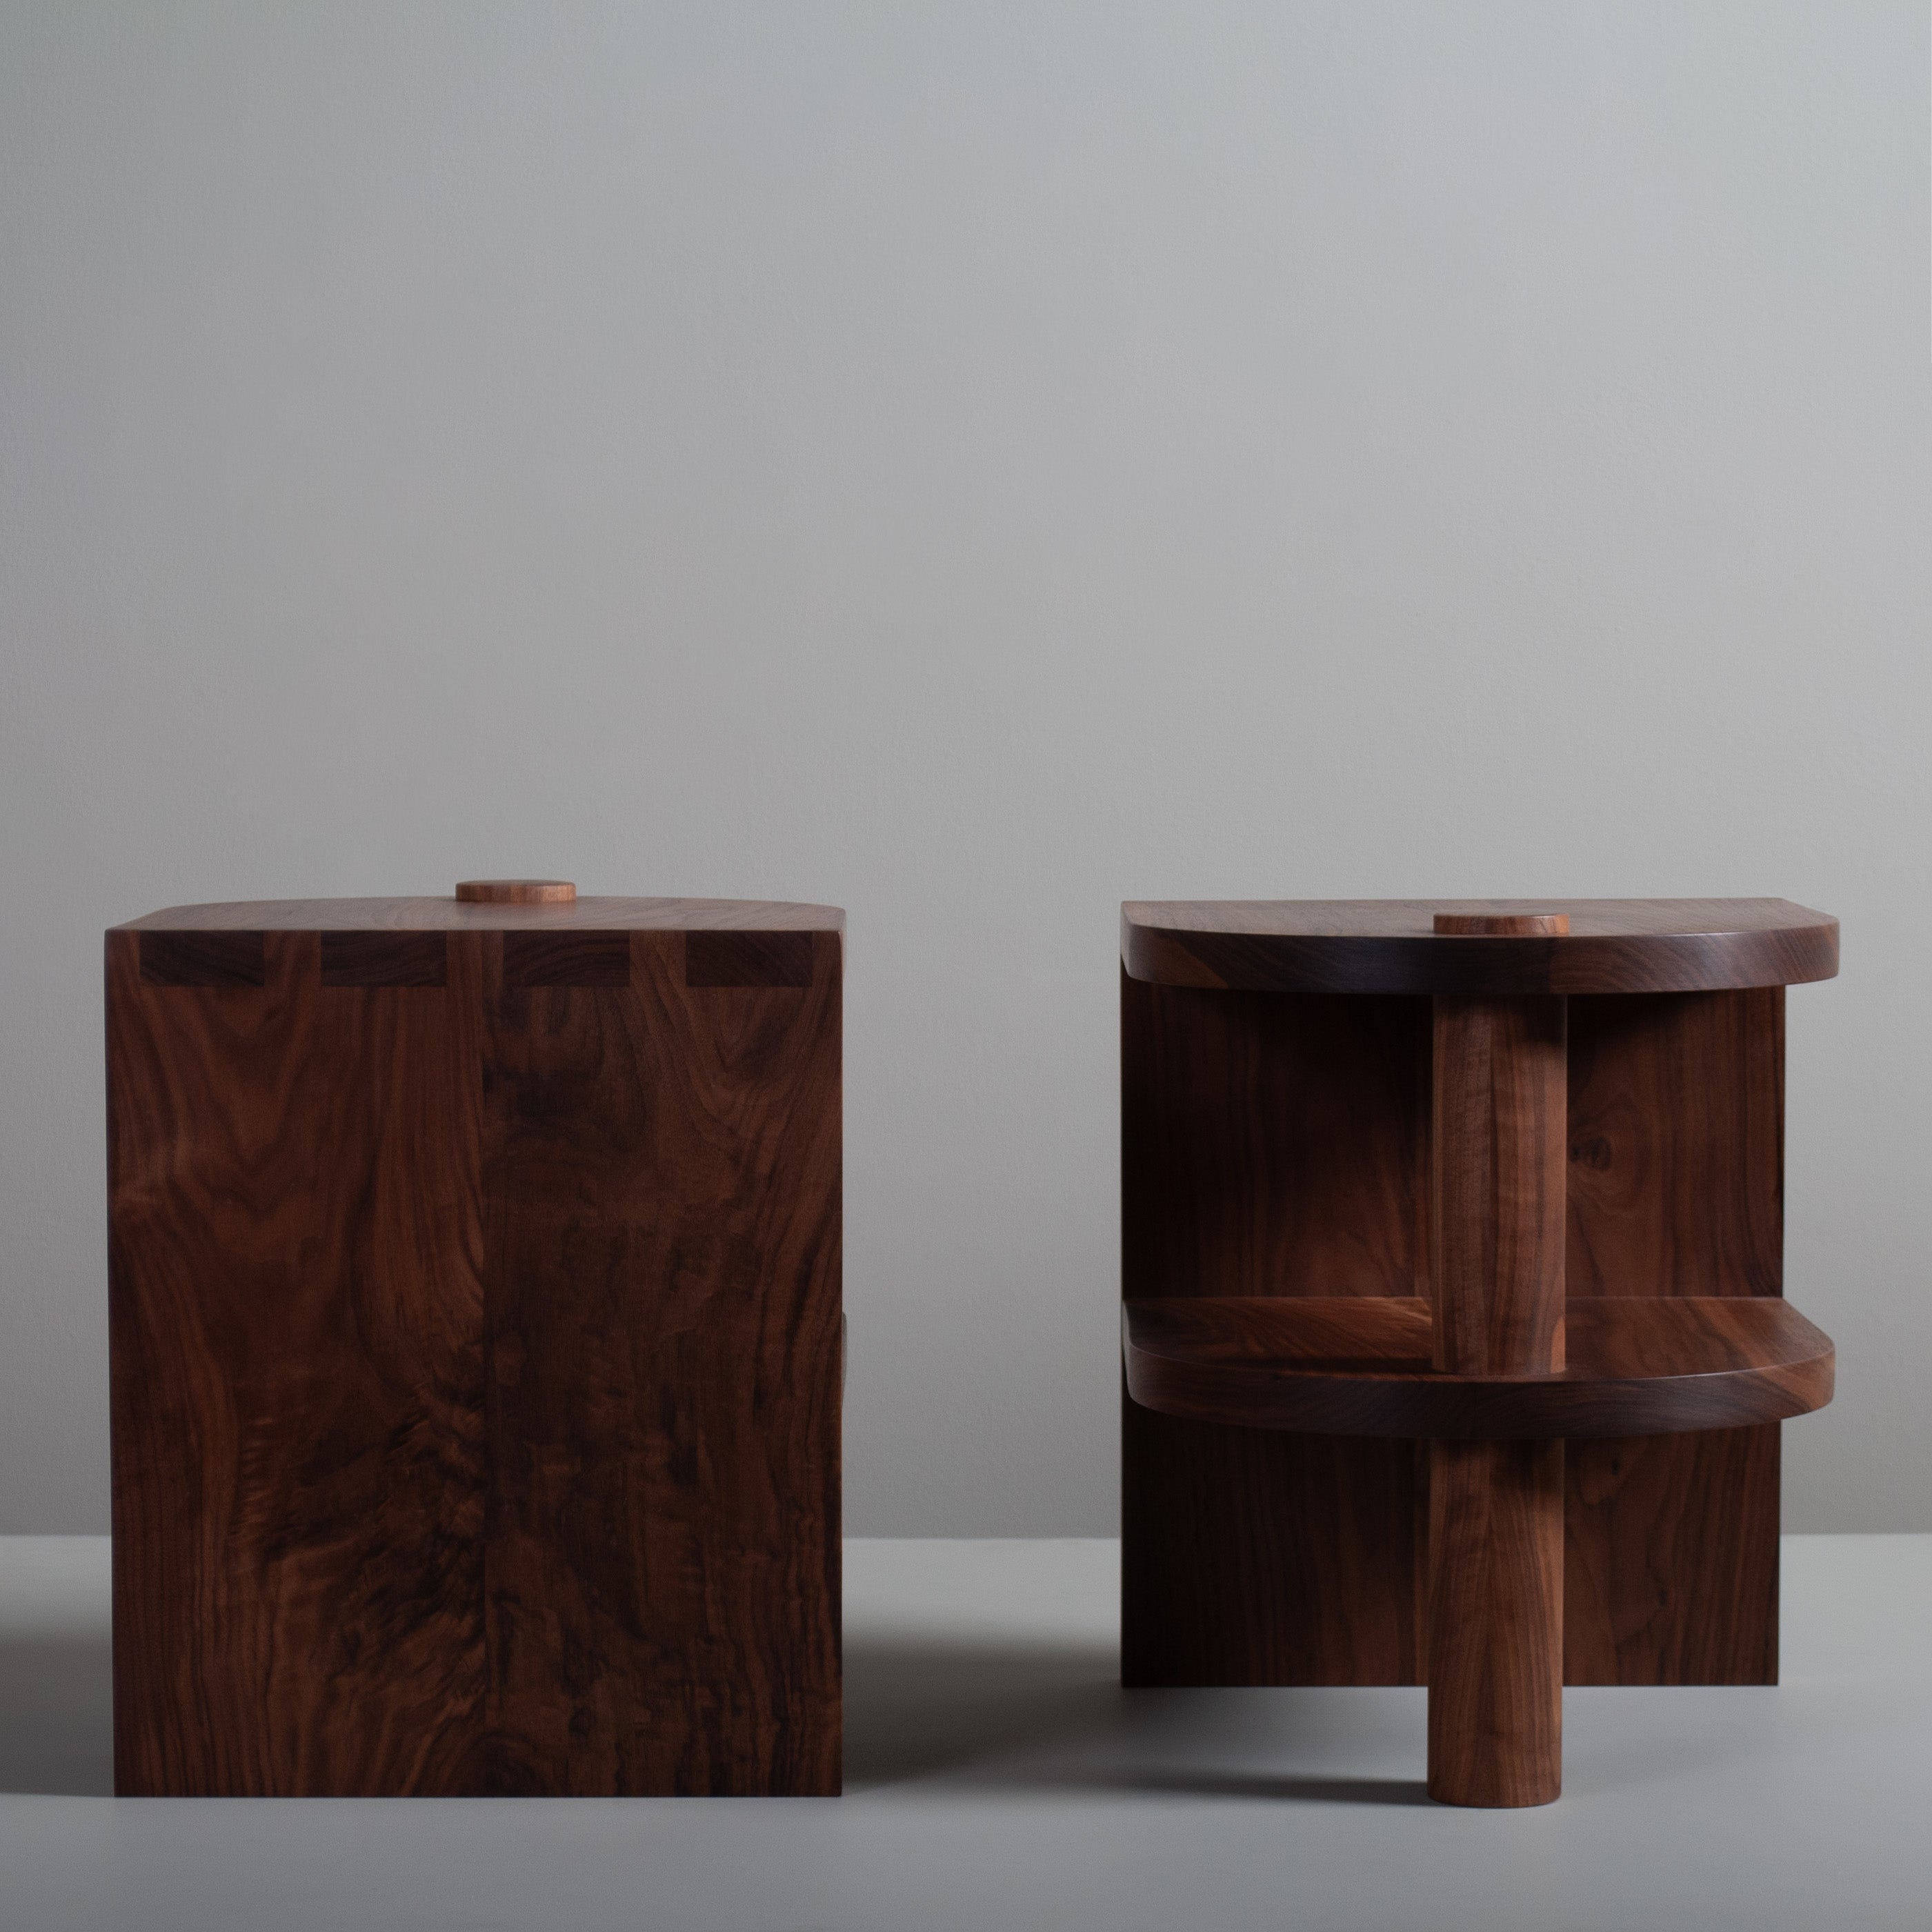 Pair of Handcrafted Walnut Nightstands, End Tables